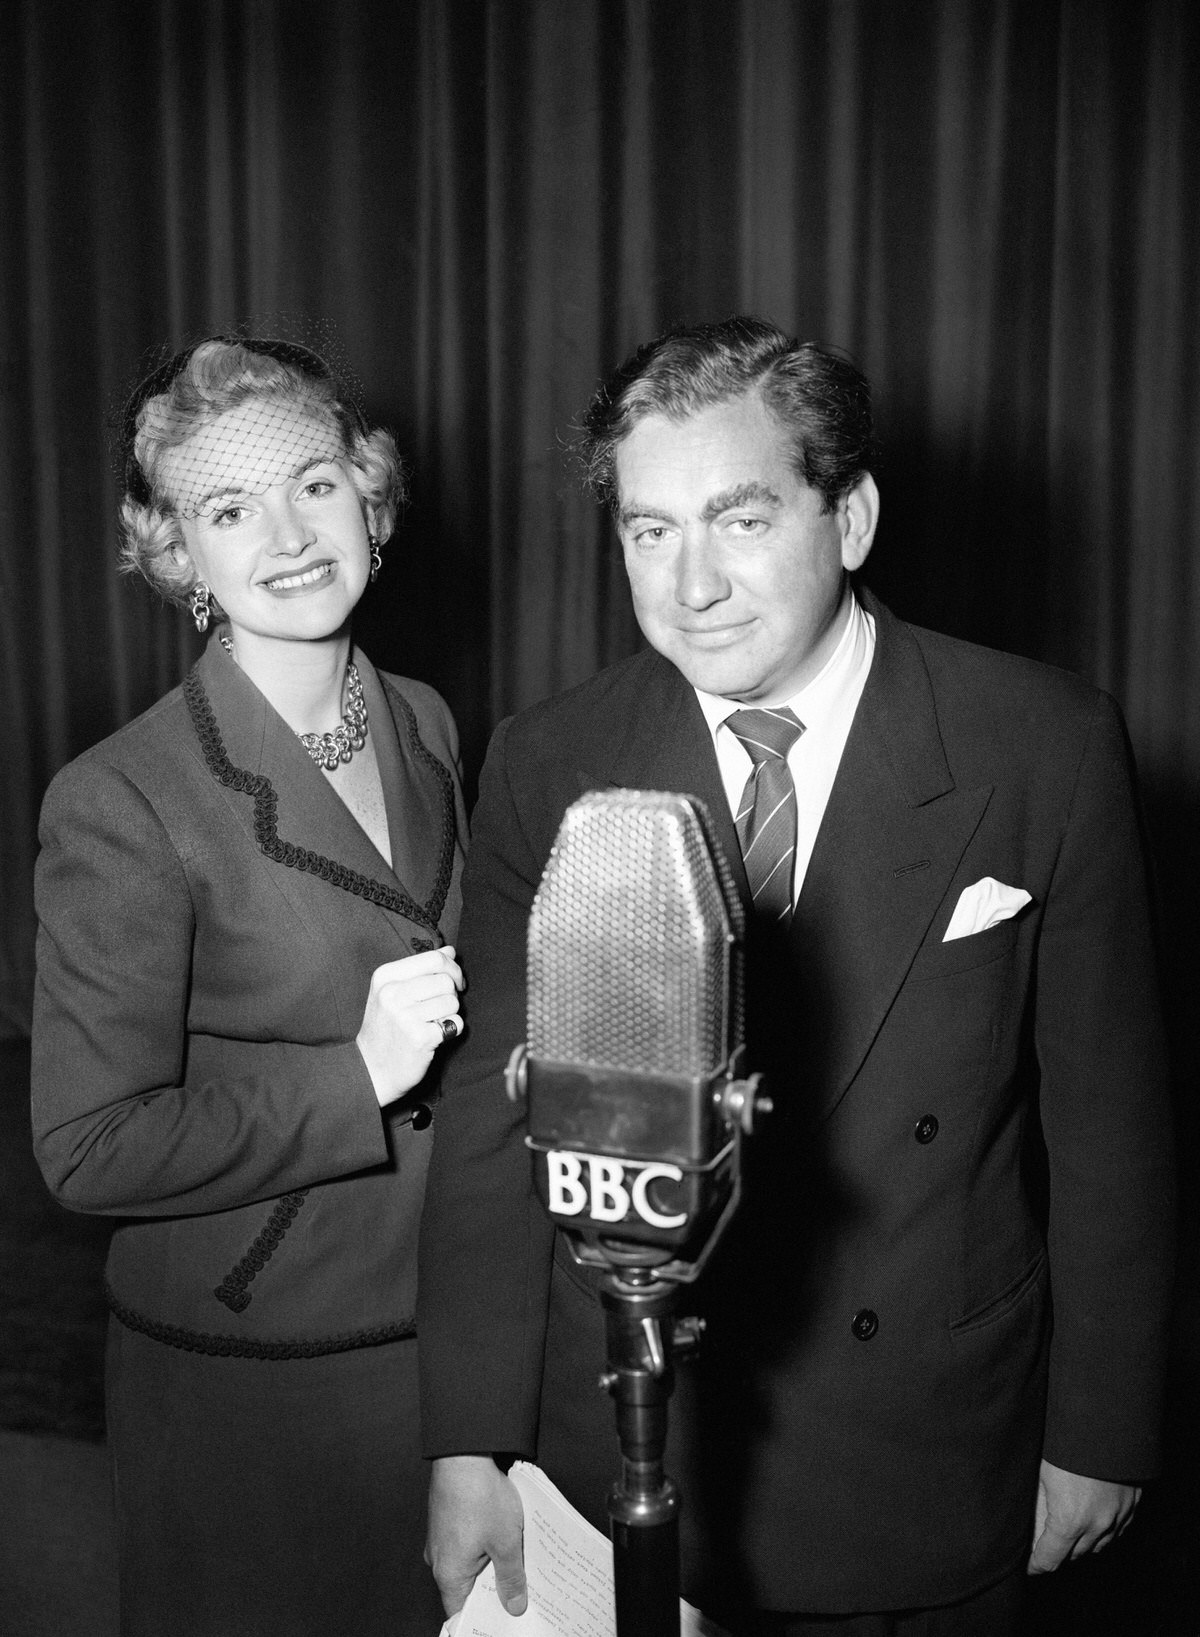 Working with smiles are Moira Lister and Tony Hancock, rehearsing together for the new radio show ‘Hancock’s Half Hour’, 1954